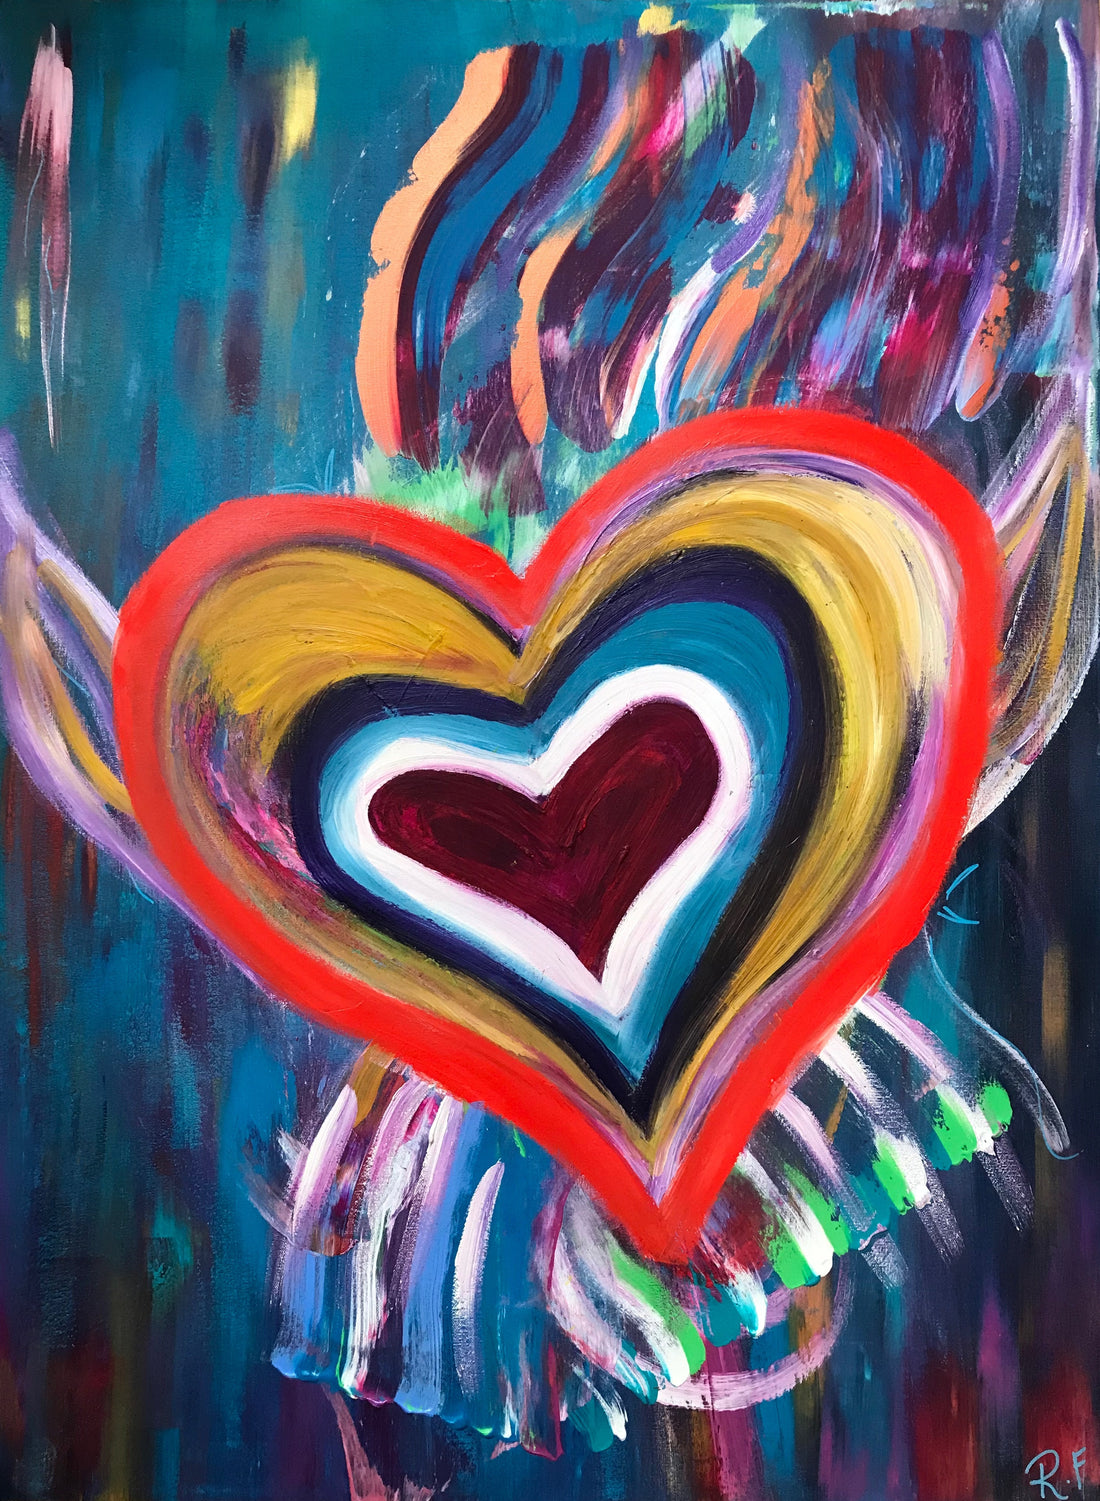 Original artwork by Reni Fee titled Broken depicts a large and colorful heart.